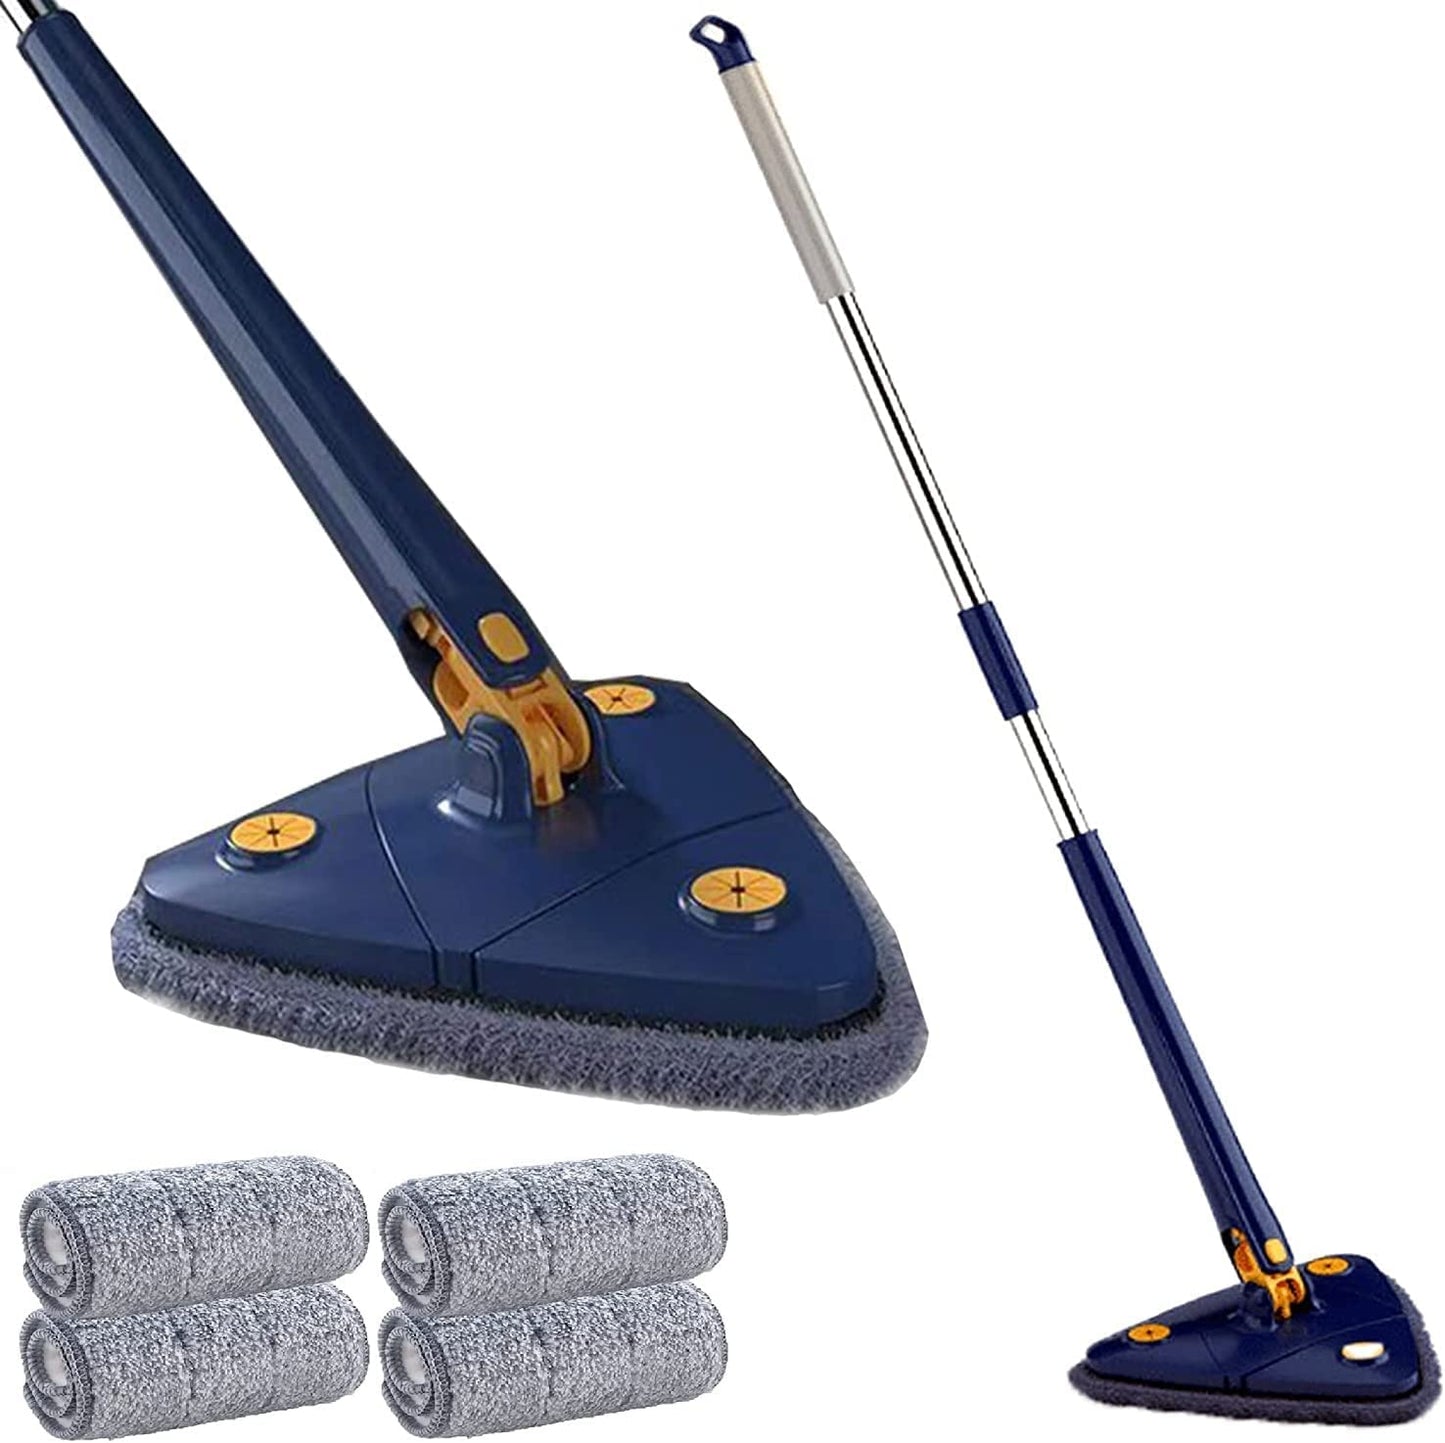 SqueezeMop™ | Cleaning made easy!